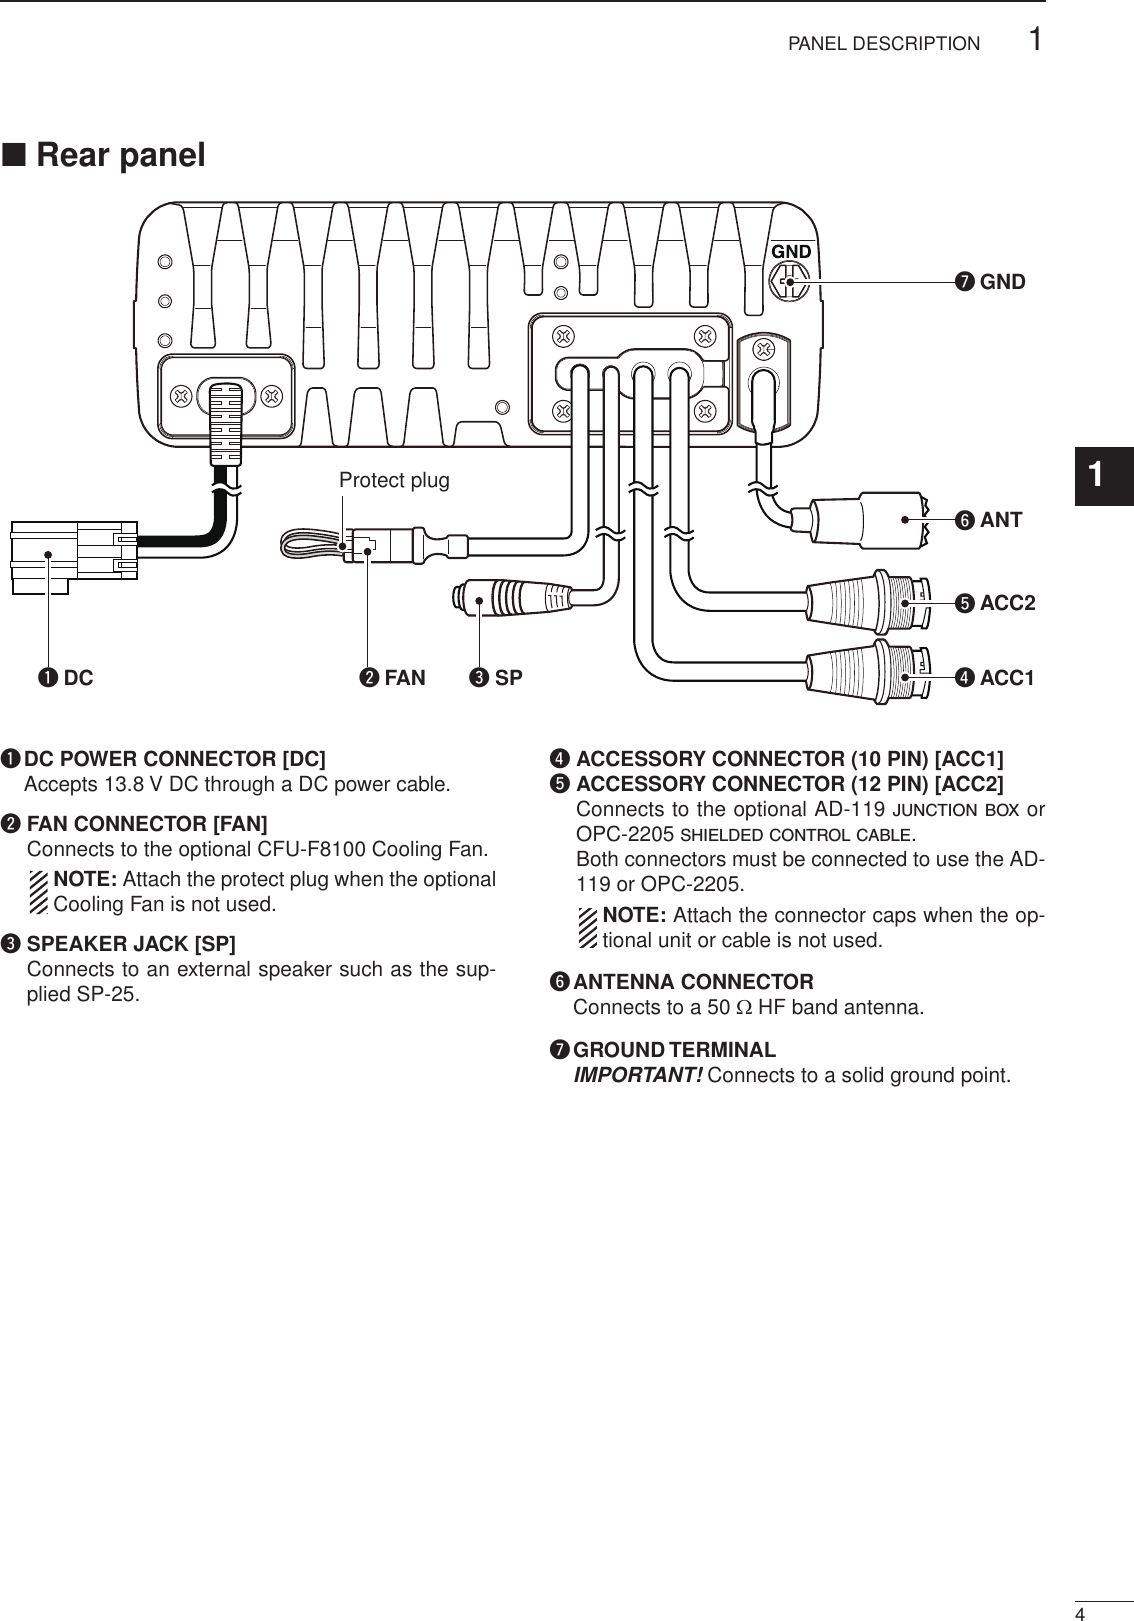 2001 NEW41PANEL DESCRIPTION1234567891011121314151617Quick Referenceq DC POWER CONNECTOR [DC]   Accepts 13.8 V DC through a DC power cable.w FAN CONNECTOR [FAN]   Connects to the optional CFU-F8100 Cooling Fan.   NOTE: Attach the protect plug when the optional Cooling Fan is not used.e SPEAKER JACK [SP]   Connects to an external speaker such as the sup-plied SP-25.r  ACCESSORY CONNECTOR (10 PIN) [ACC1] t  ACCESSORY CONNECTOR (12 PIN) [ACC2]    Connects to the optional AD-119 junction b o x  or OPC-2205 s h i e l d e d  c o n t r o l  c a b l e .   Both connectors must be connected to use the AD-119 or OPC-2205.   NOTE: Attach the connector caps when the op-tional unit or cable is not used.y ANTENNA CONNECTOR   Connects to a 50 Ω HF band antenna.u GROUND TERMINAL   IMPORTANT! Connects to a solid ground point.ACC2ACC1GNDANTytruDCqFANProtect plugwSPe■ Rear panel